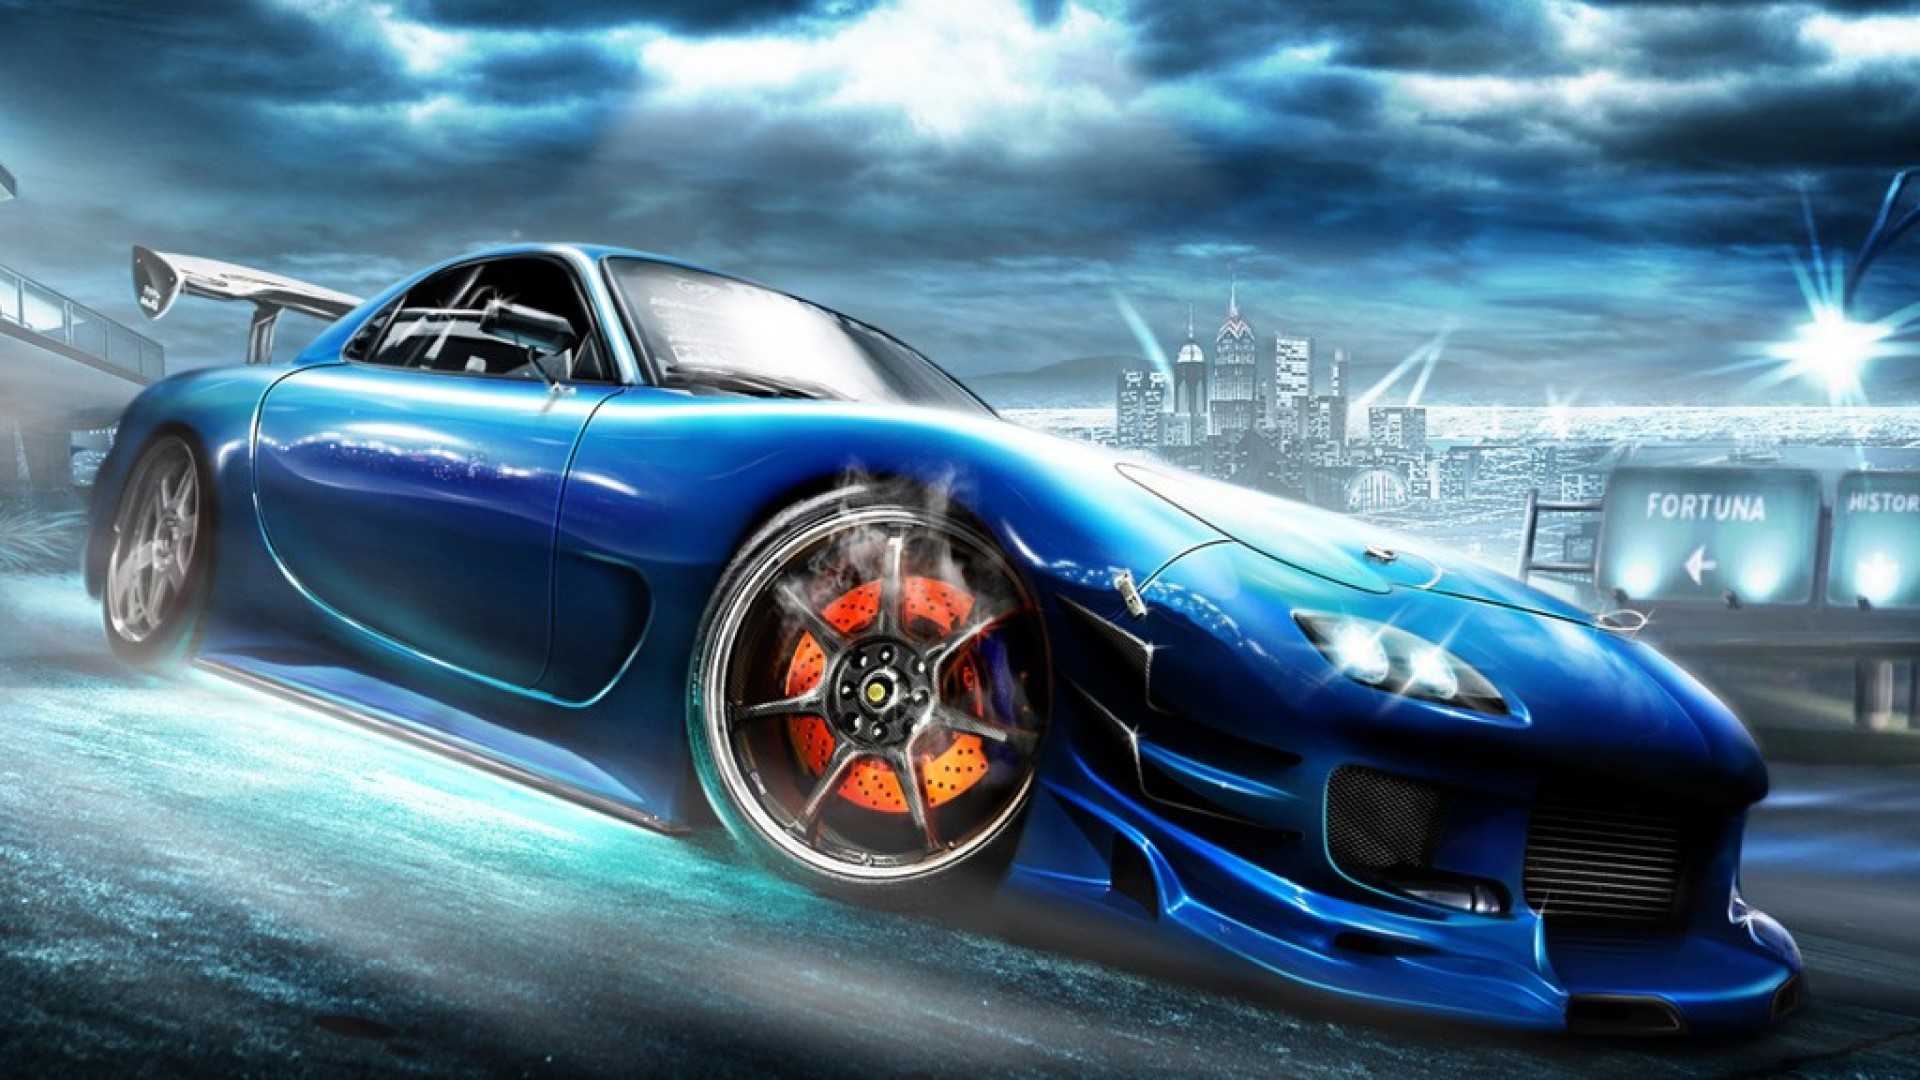 Awesome Mazda rx7 Wallpaper. 1920×1080